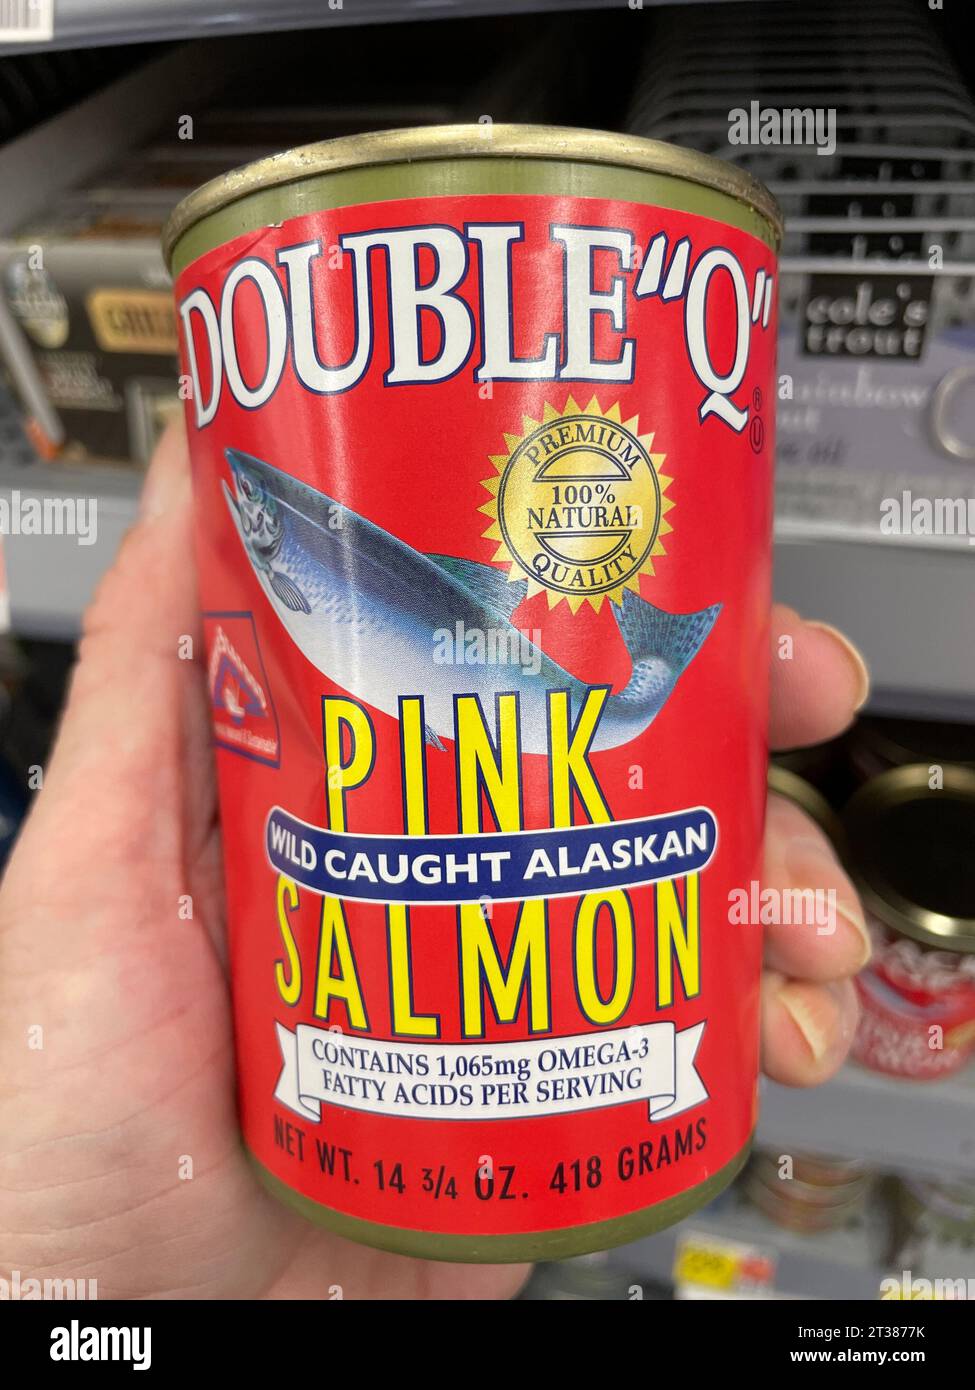 Grovetown, Ga USA - 08 06 23: Walmart grocery store Double Q canned pink salmon Stock Photo